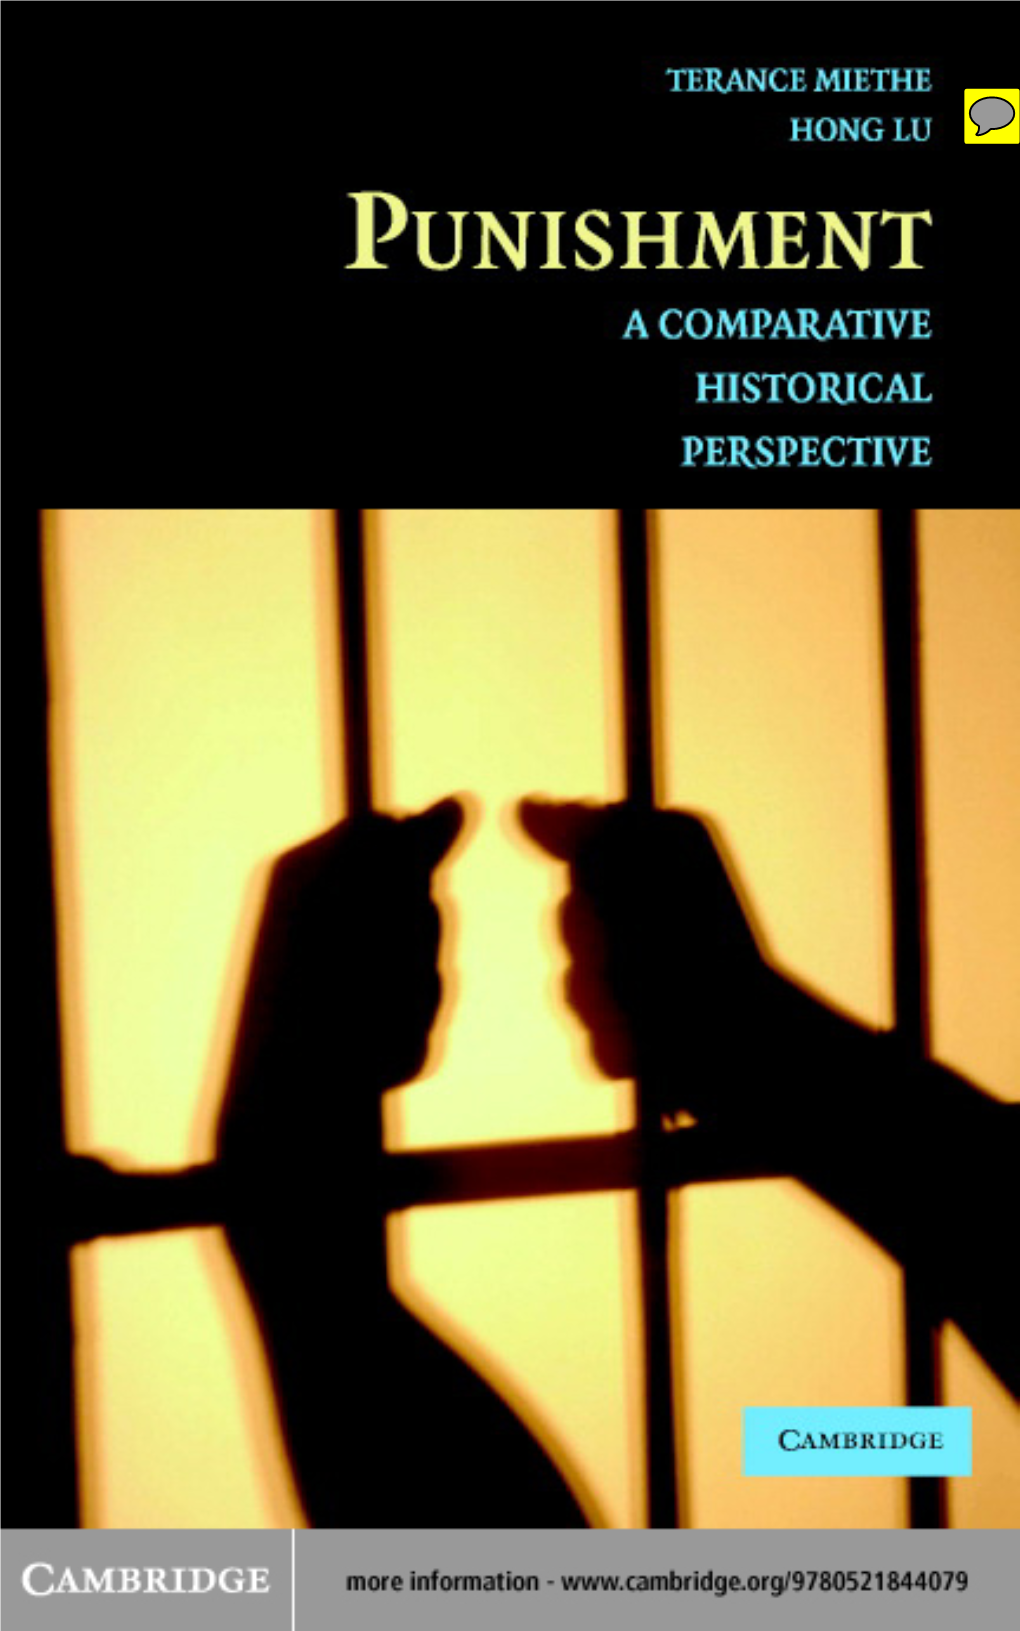 PUNISHMENT: a Comparative Historical Perspective